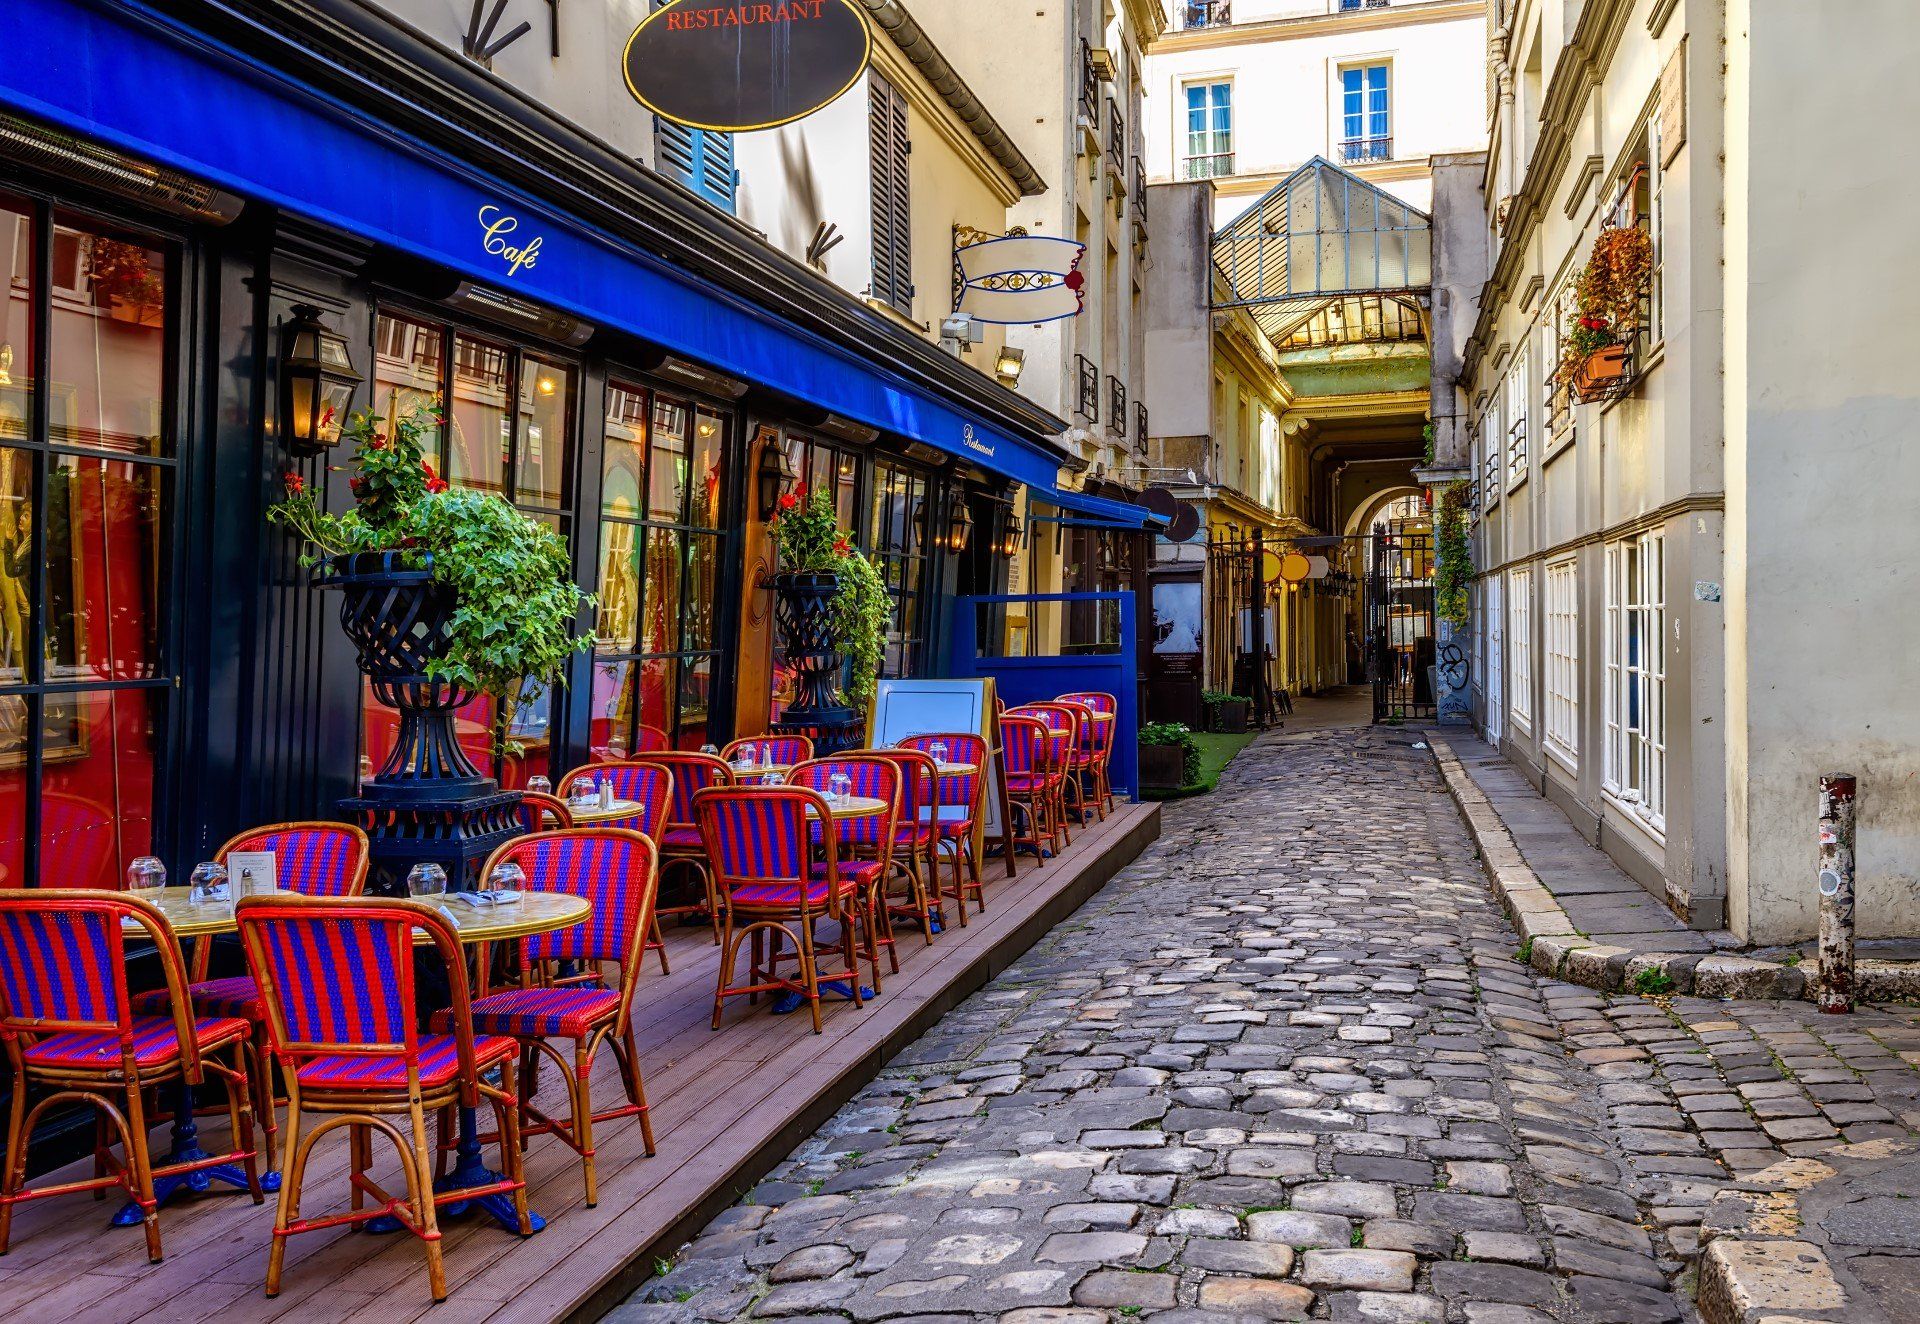 Revel in the authentic French charm of Paris's olf quarters, with its many bohemian cafes